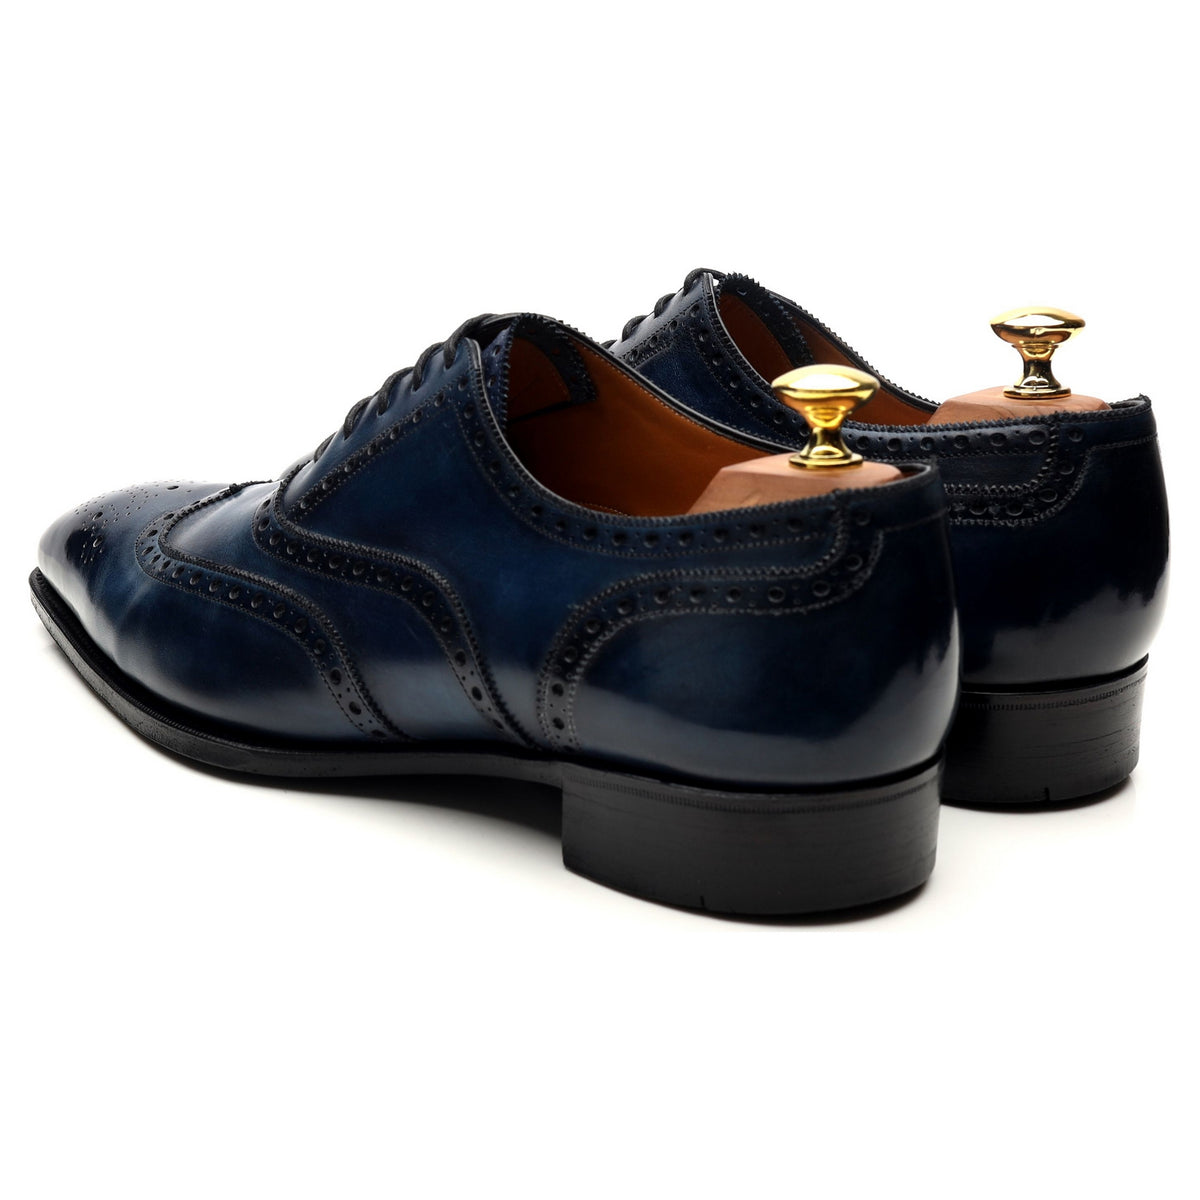 &#39;Rothschild&#39; Blue Sapphire Patina Leather Oxford Brogues UK 8.5 F